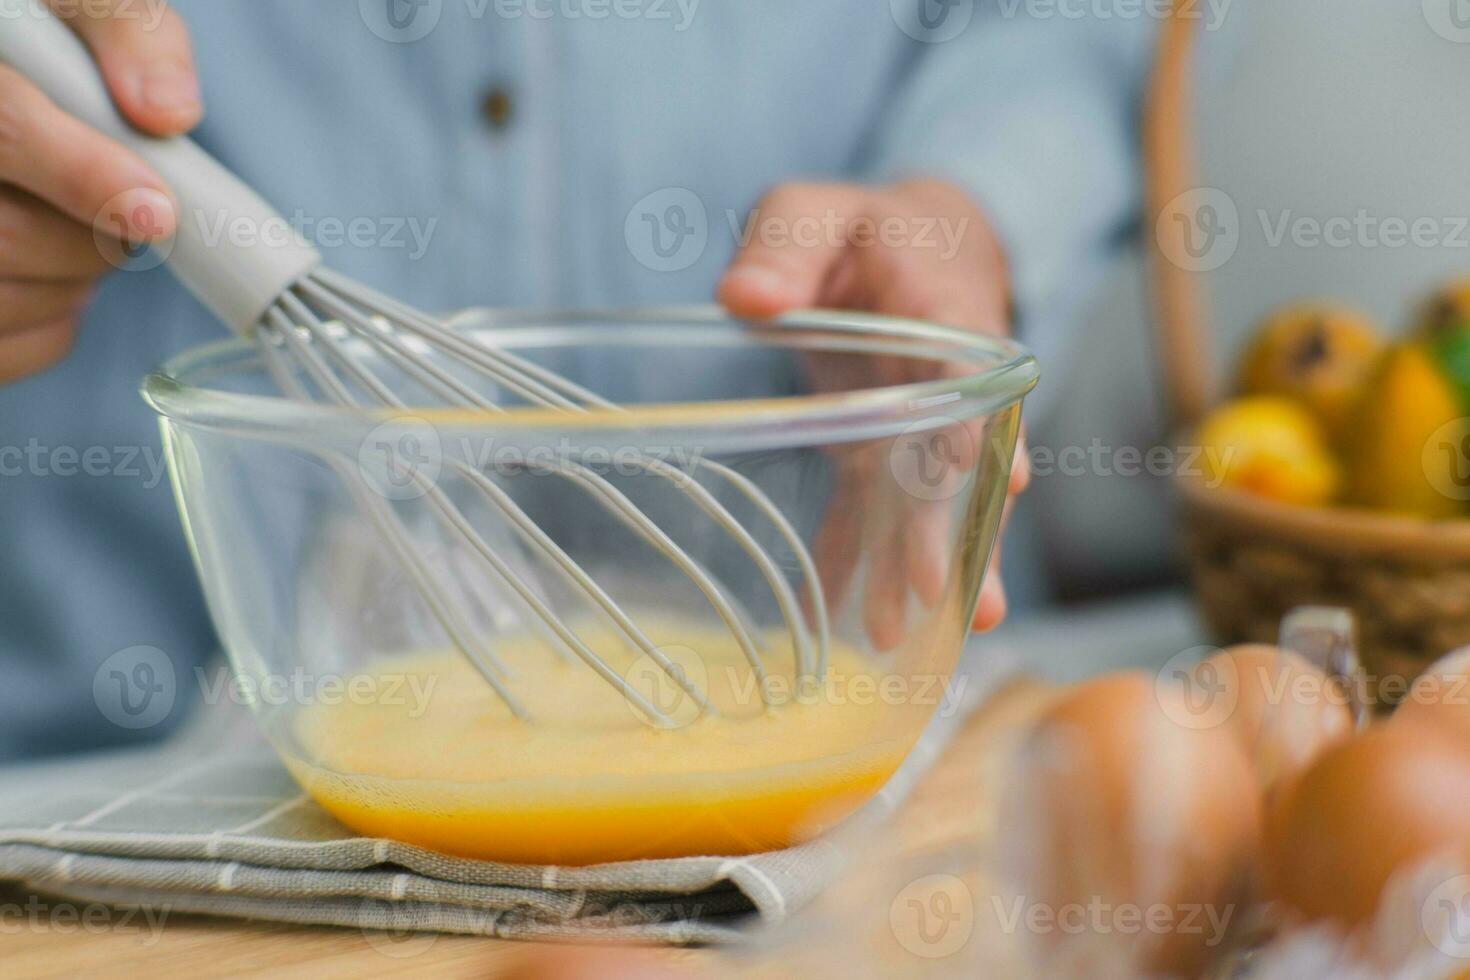 Young woman cooking in bright kitchen, hands whisking eggs in a bowl placed on towel and wooden table. Preparing ingredients for healthy cooking. Homemade food photo